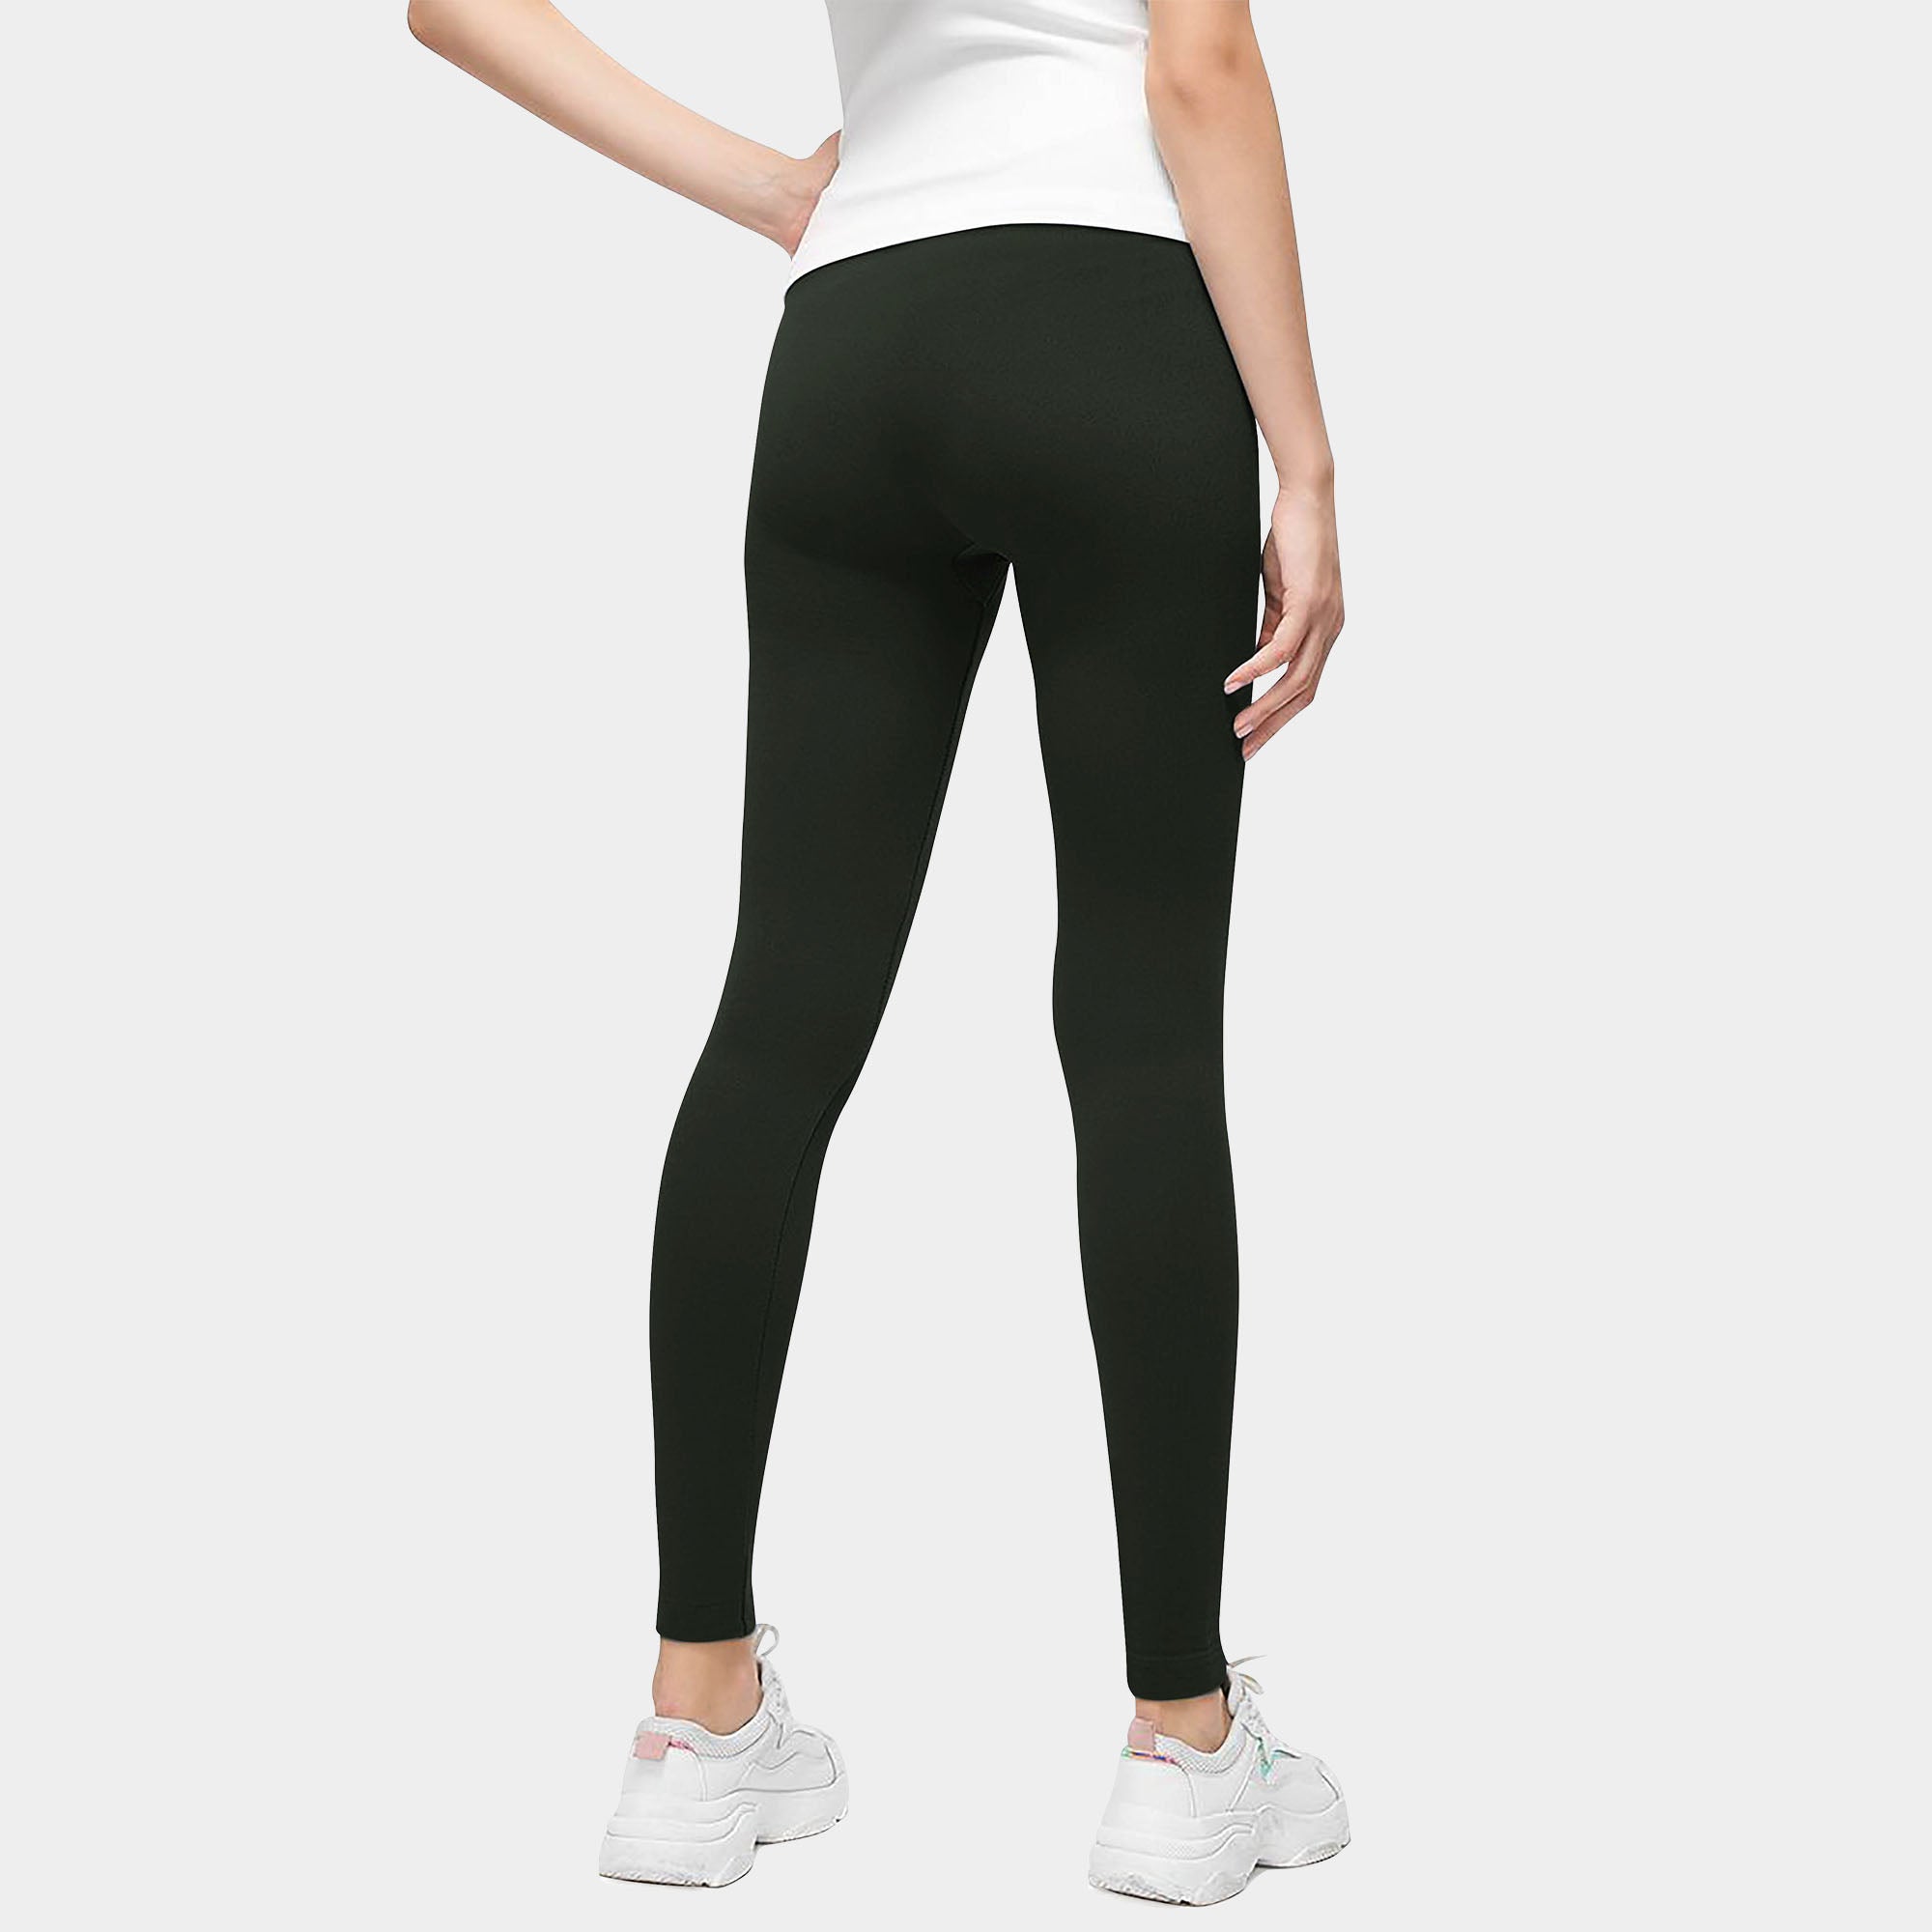 high_waist_inner_soft_lined_waistband_lightweight_yoga_thermal_cozy_comfortable_fashionable_pants_leggins_leggings_spanx_leather_ballet_pilates_polainas_de_las_mujeres_workout_compression_wrinkle_resistant_treggings_best_sexy_jegging_women_girl_girls_womens_spandex_running_winter_squat_thick_cheap_anti_cellulite_pants_sweatpant_sweatpants_ladies_Olive